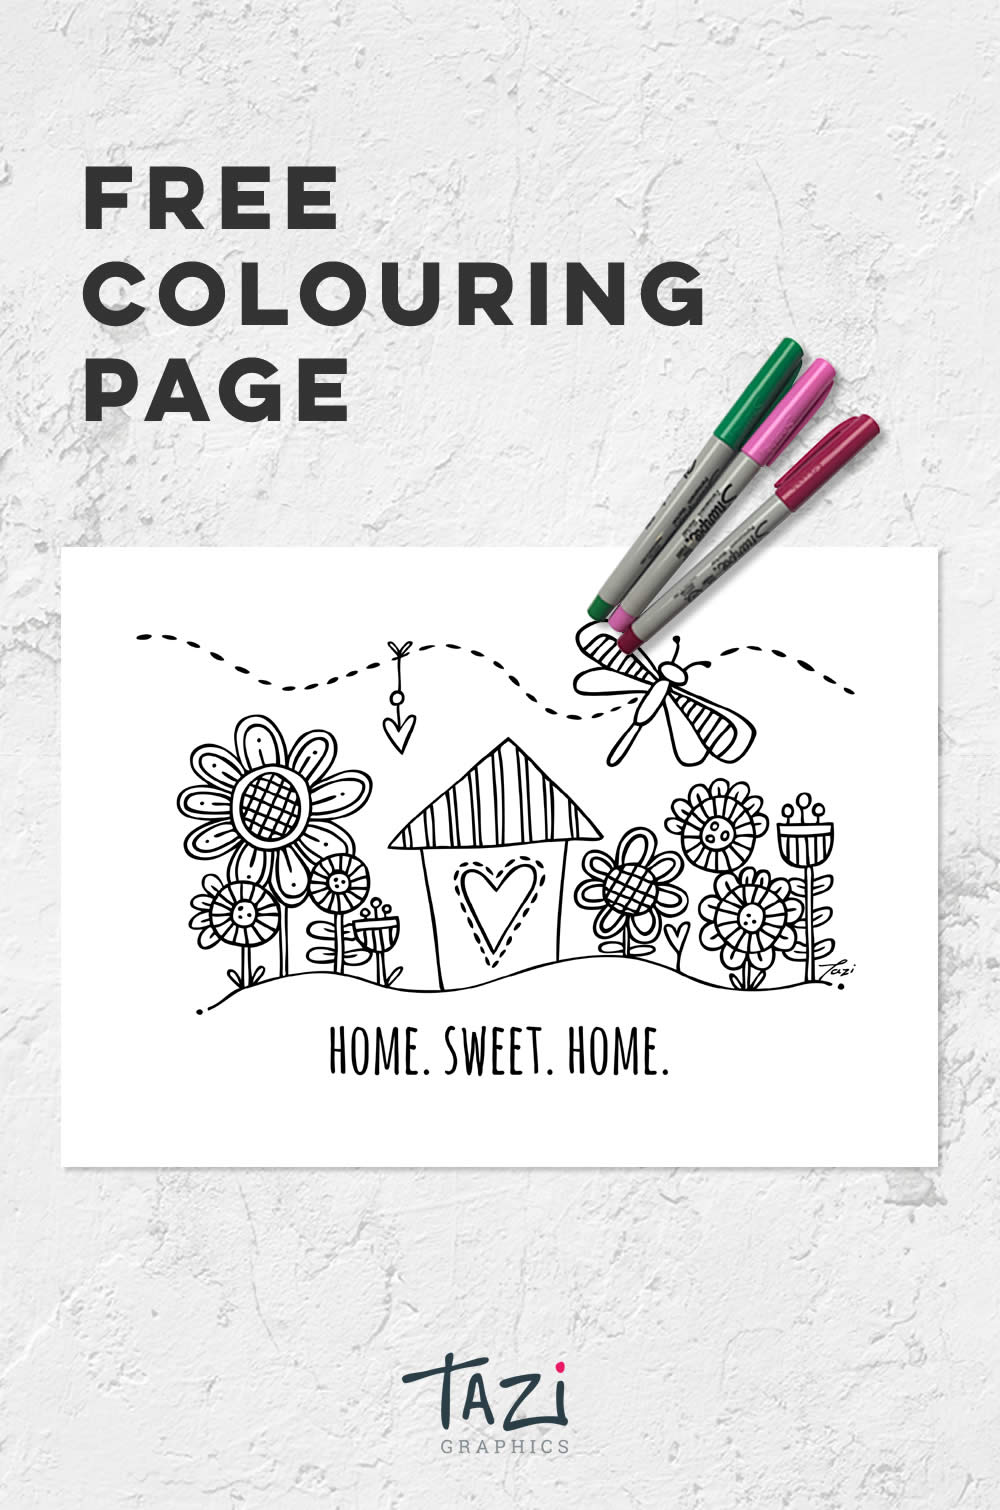 https://www.tazi.graphics/wp-content/uploads/pin-free-colouring-home.jpg